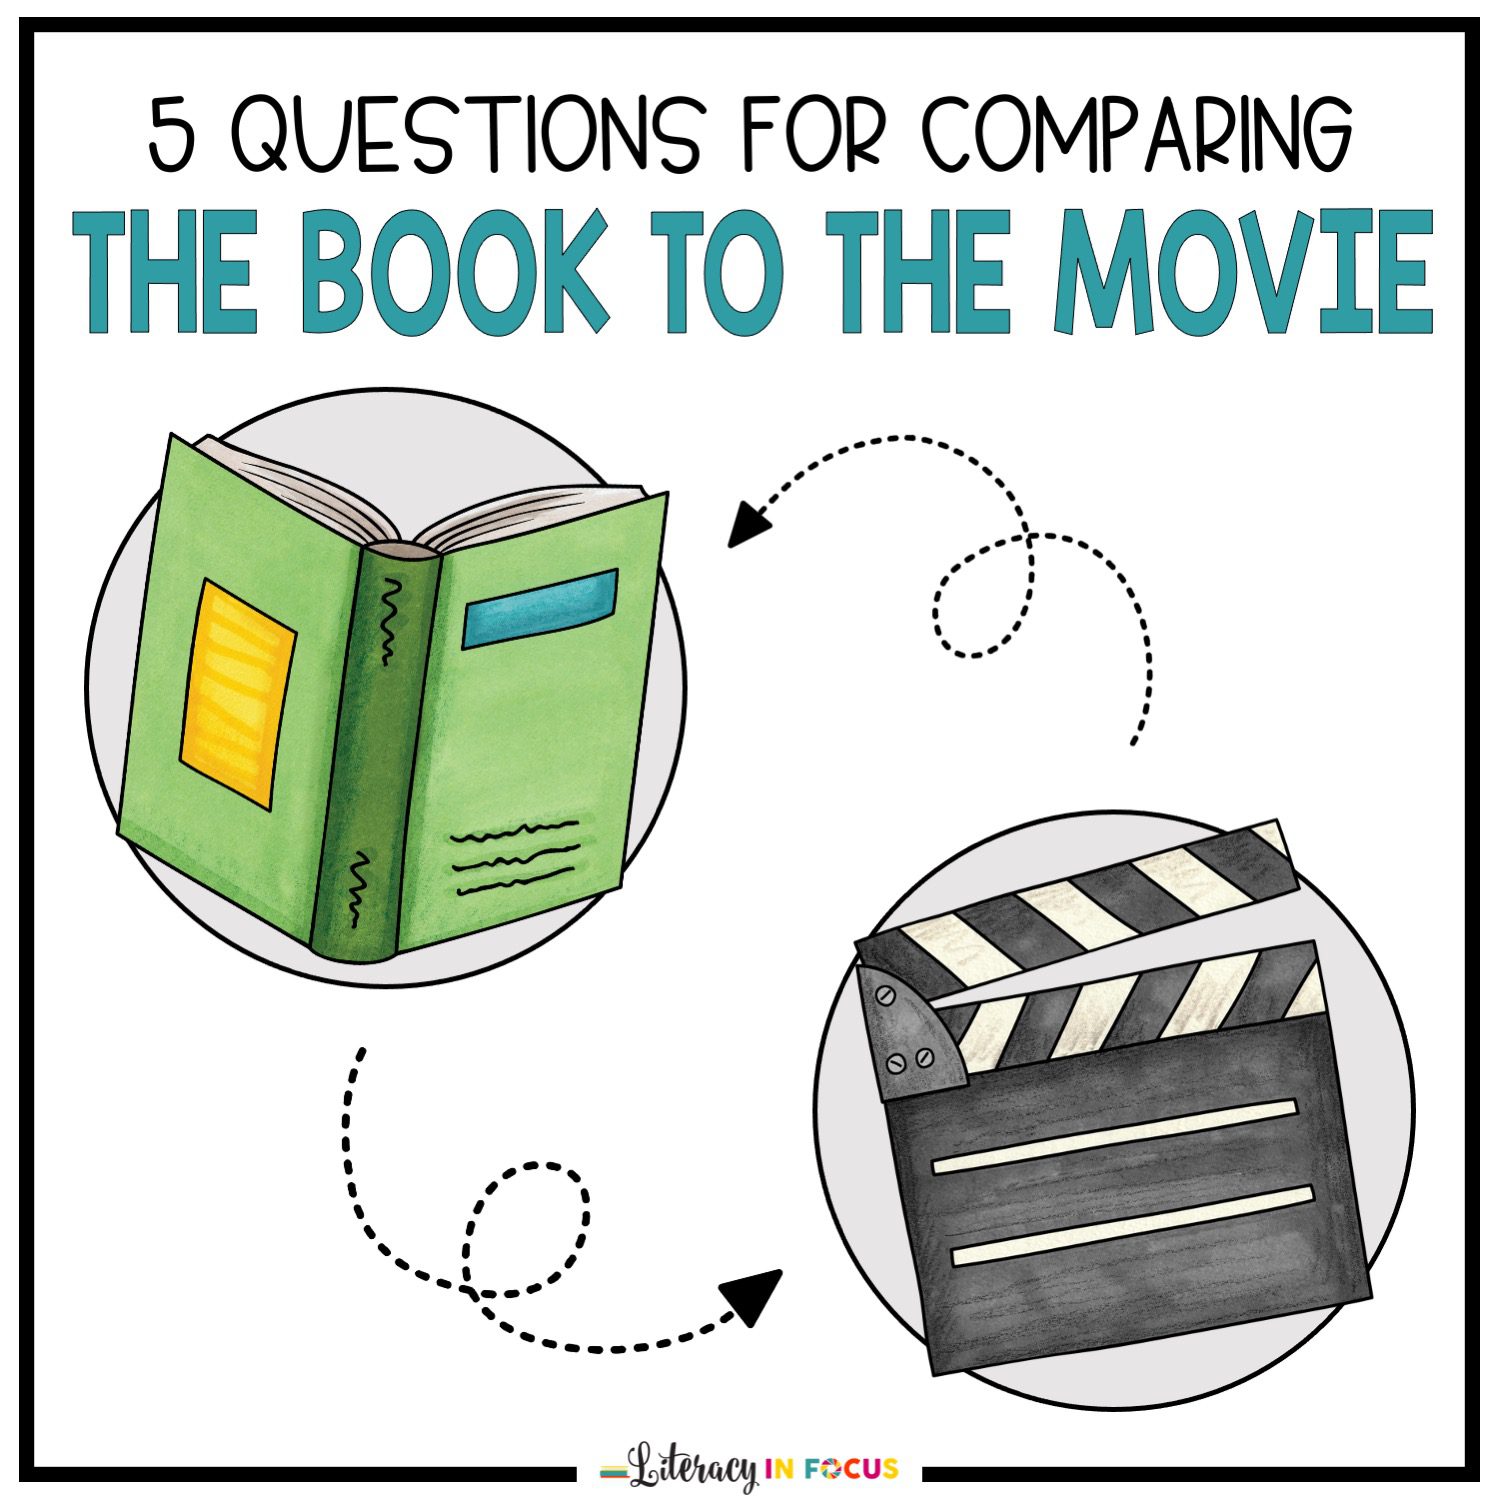 5 Questions for Comparing the Book vs the Movie